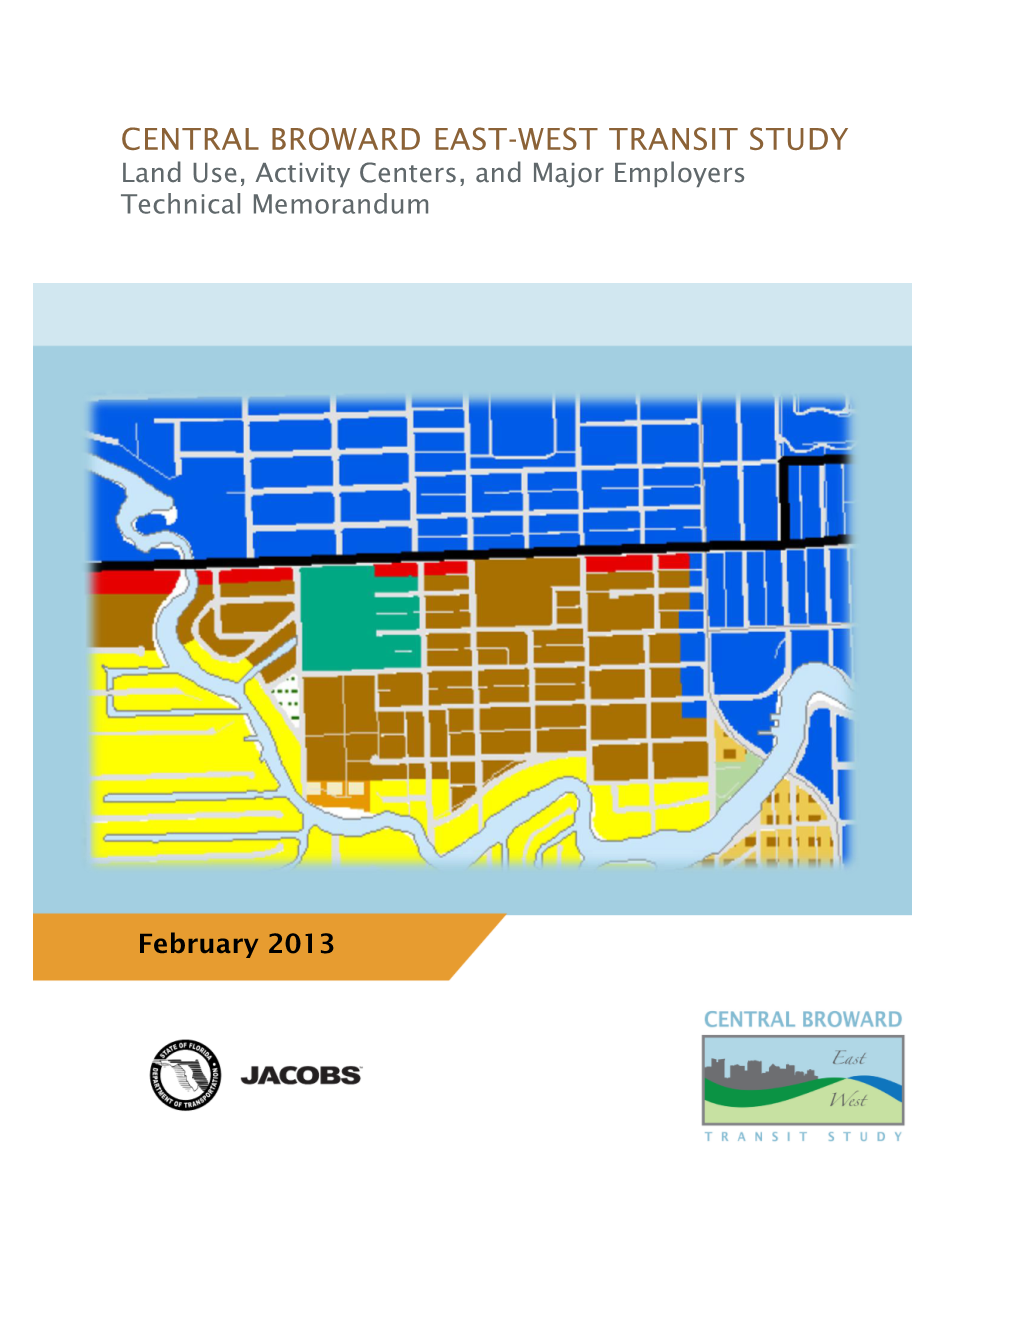 CENTRAL BROWARD EAST-WEST TRANSIT STUDY Land Use, Activity Centers, and Major Employers Technical Memorandum